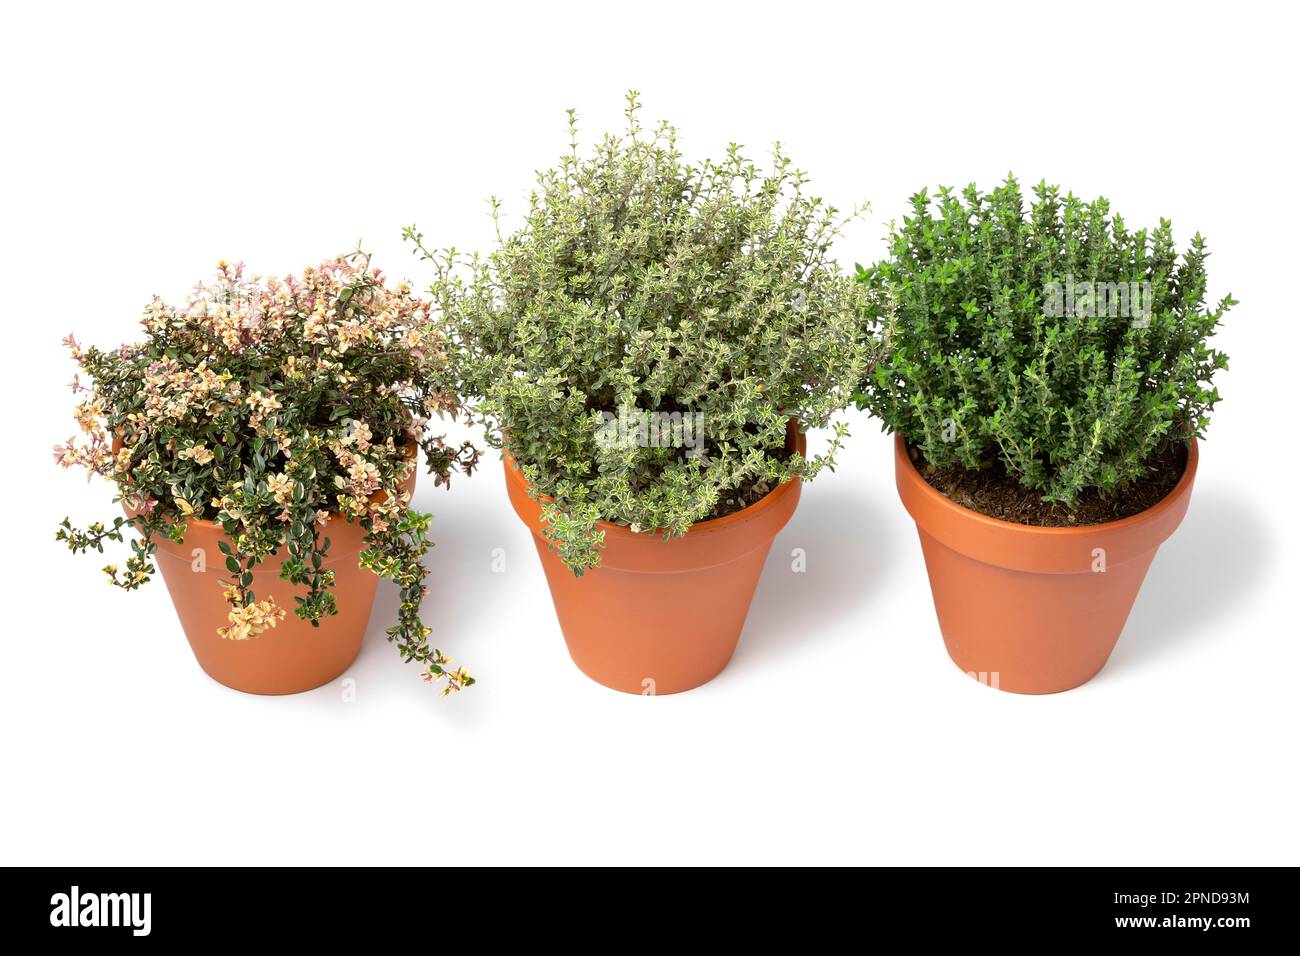 Ceramic plant pots with a variation of different fresh thyme plants isolated on white background Stock Photo